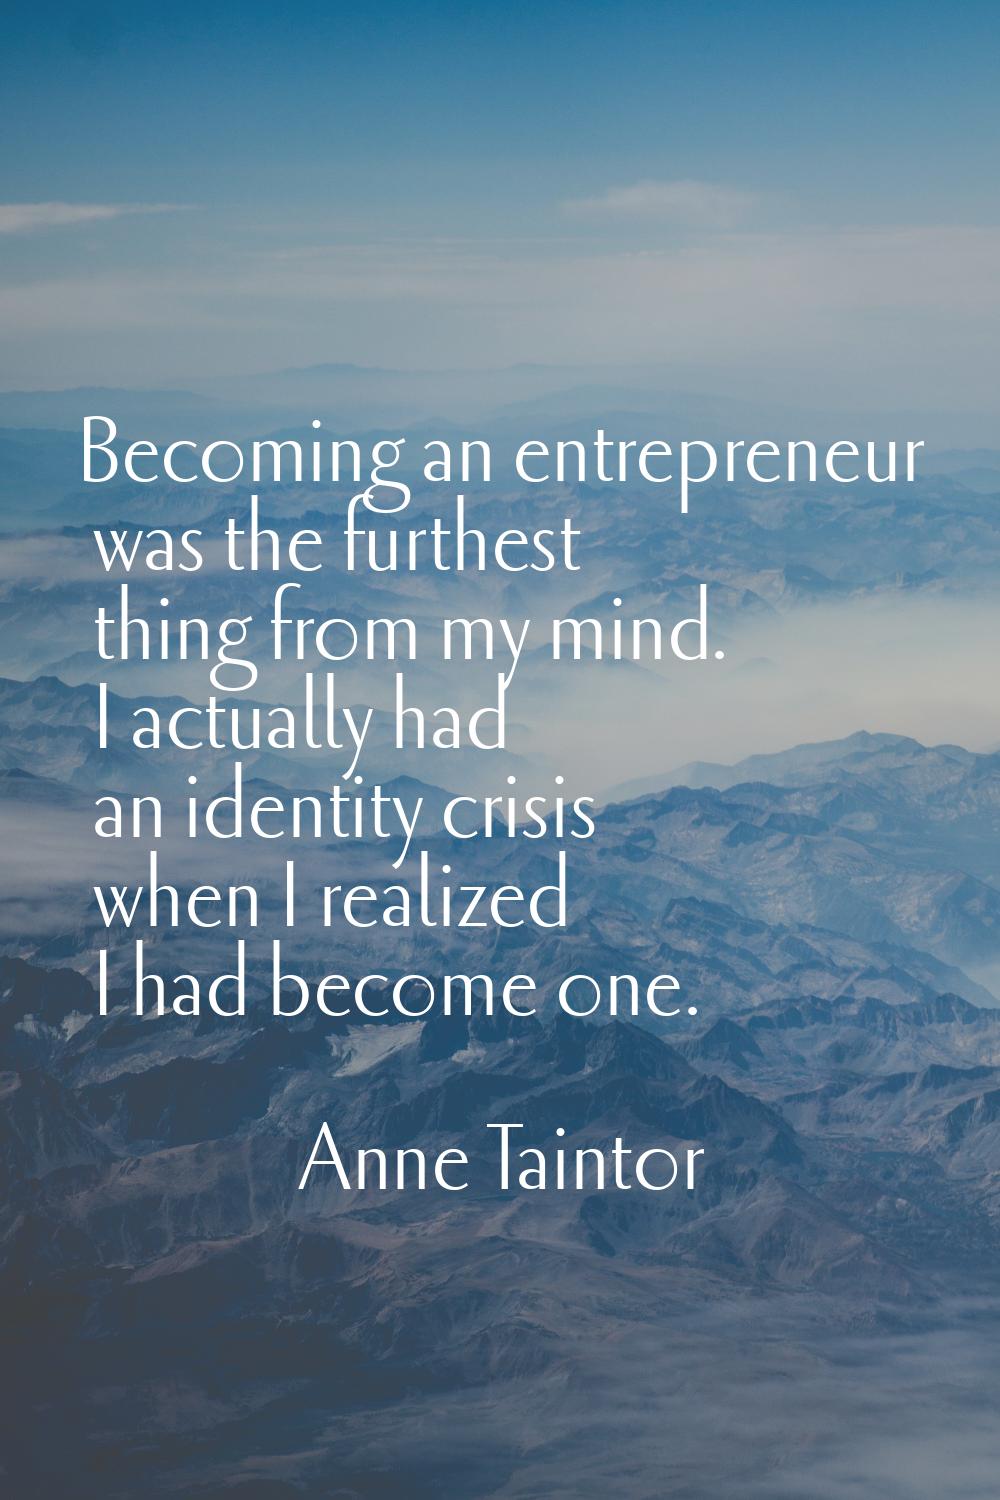 Becoming an entrepreneur was the furthest thing from my mind. I actually had an identity crisis whe